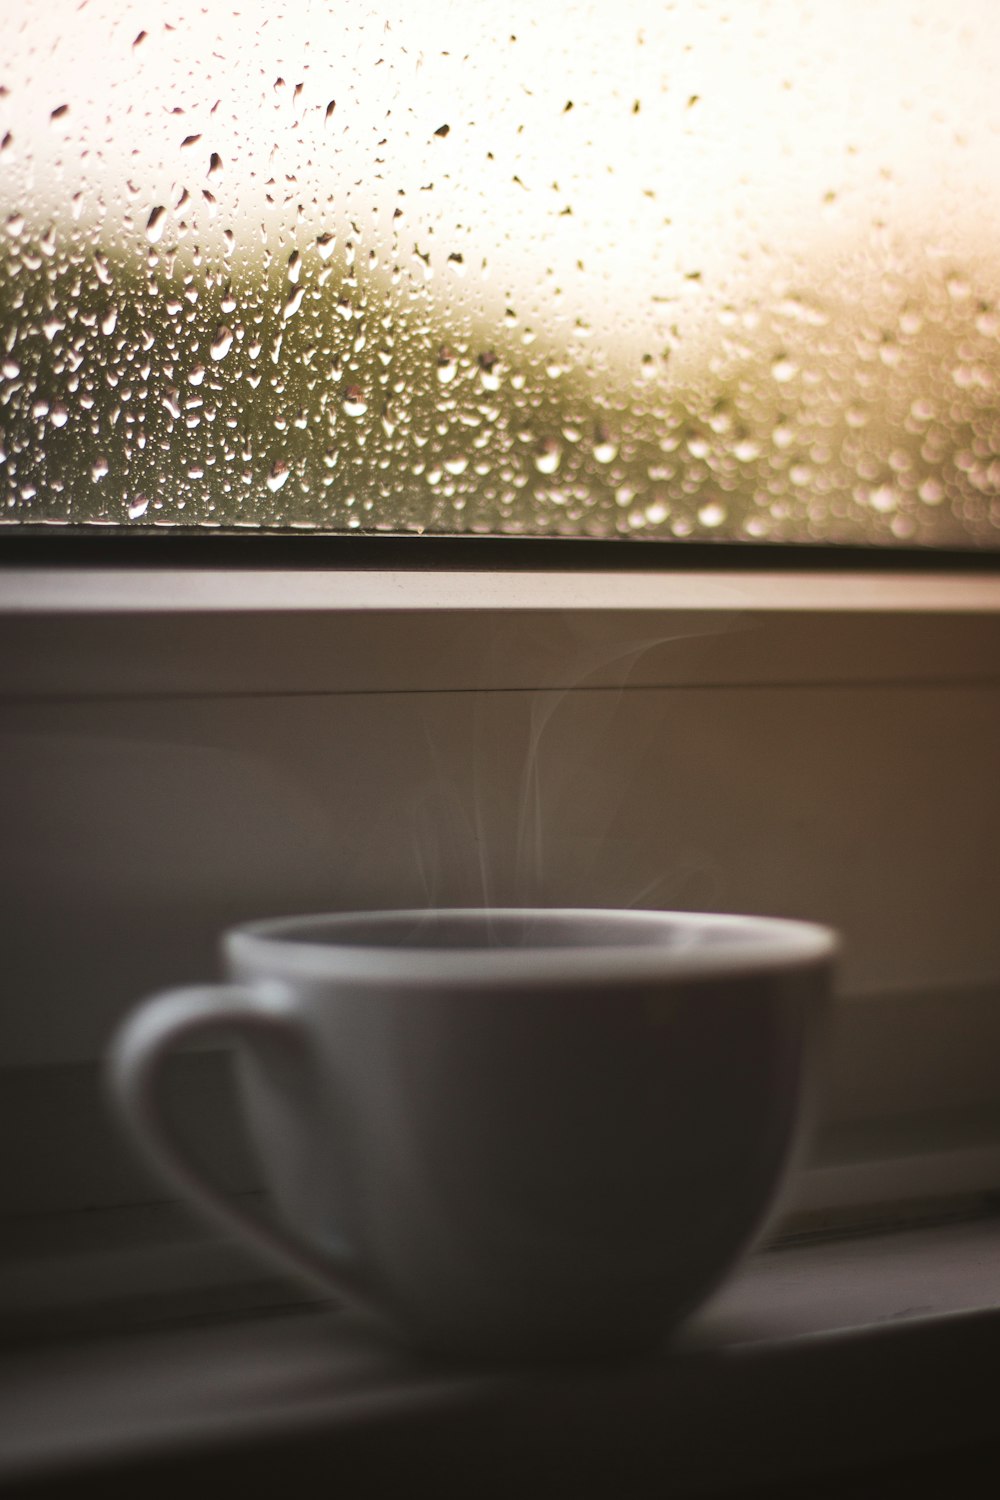 Best Coffee Rain Pictures Hd Download Free Images On Unsplash